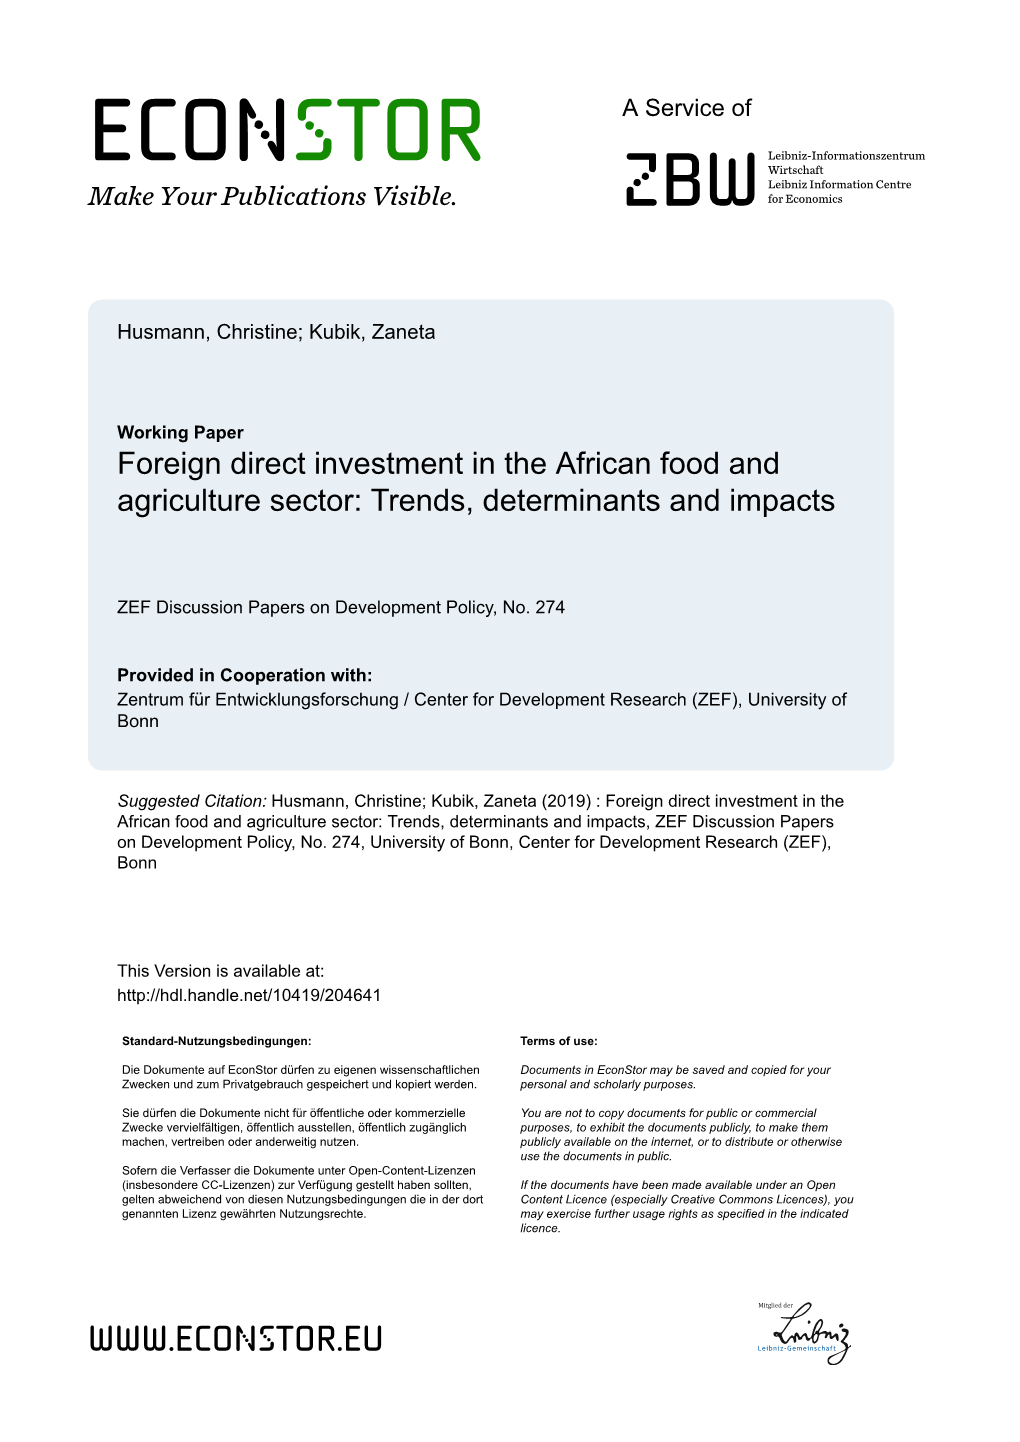 Foreign Direct Investment in the African Food and Agriculture Sector: Trends, Determinants and Impacts